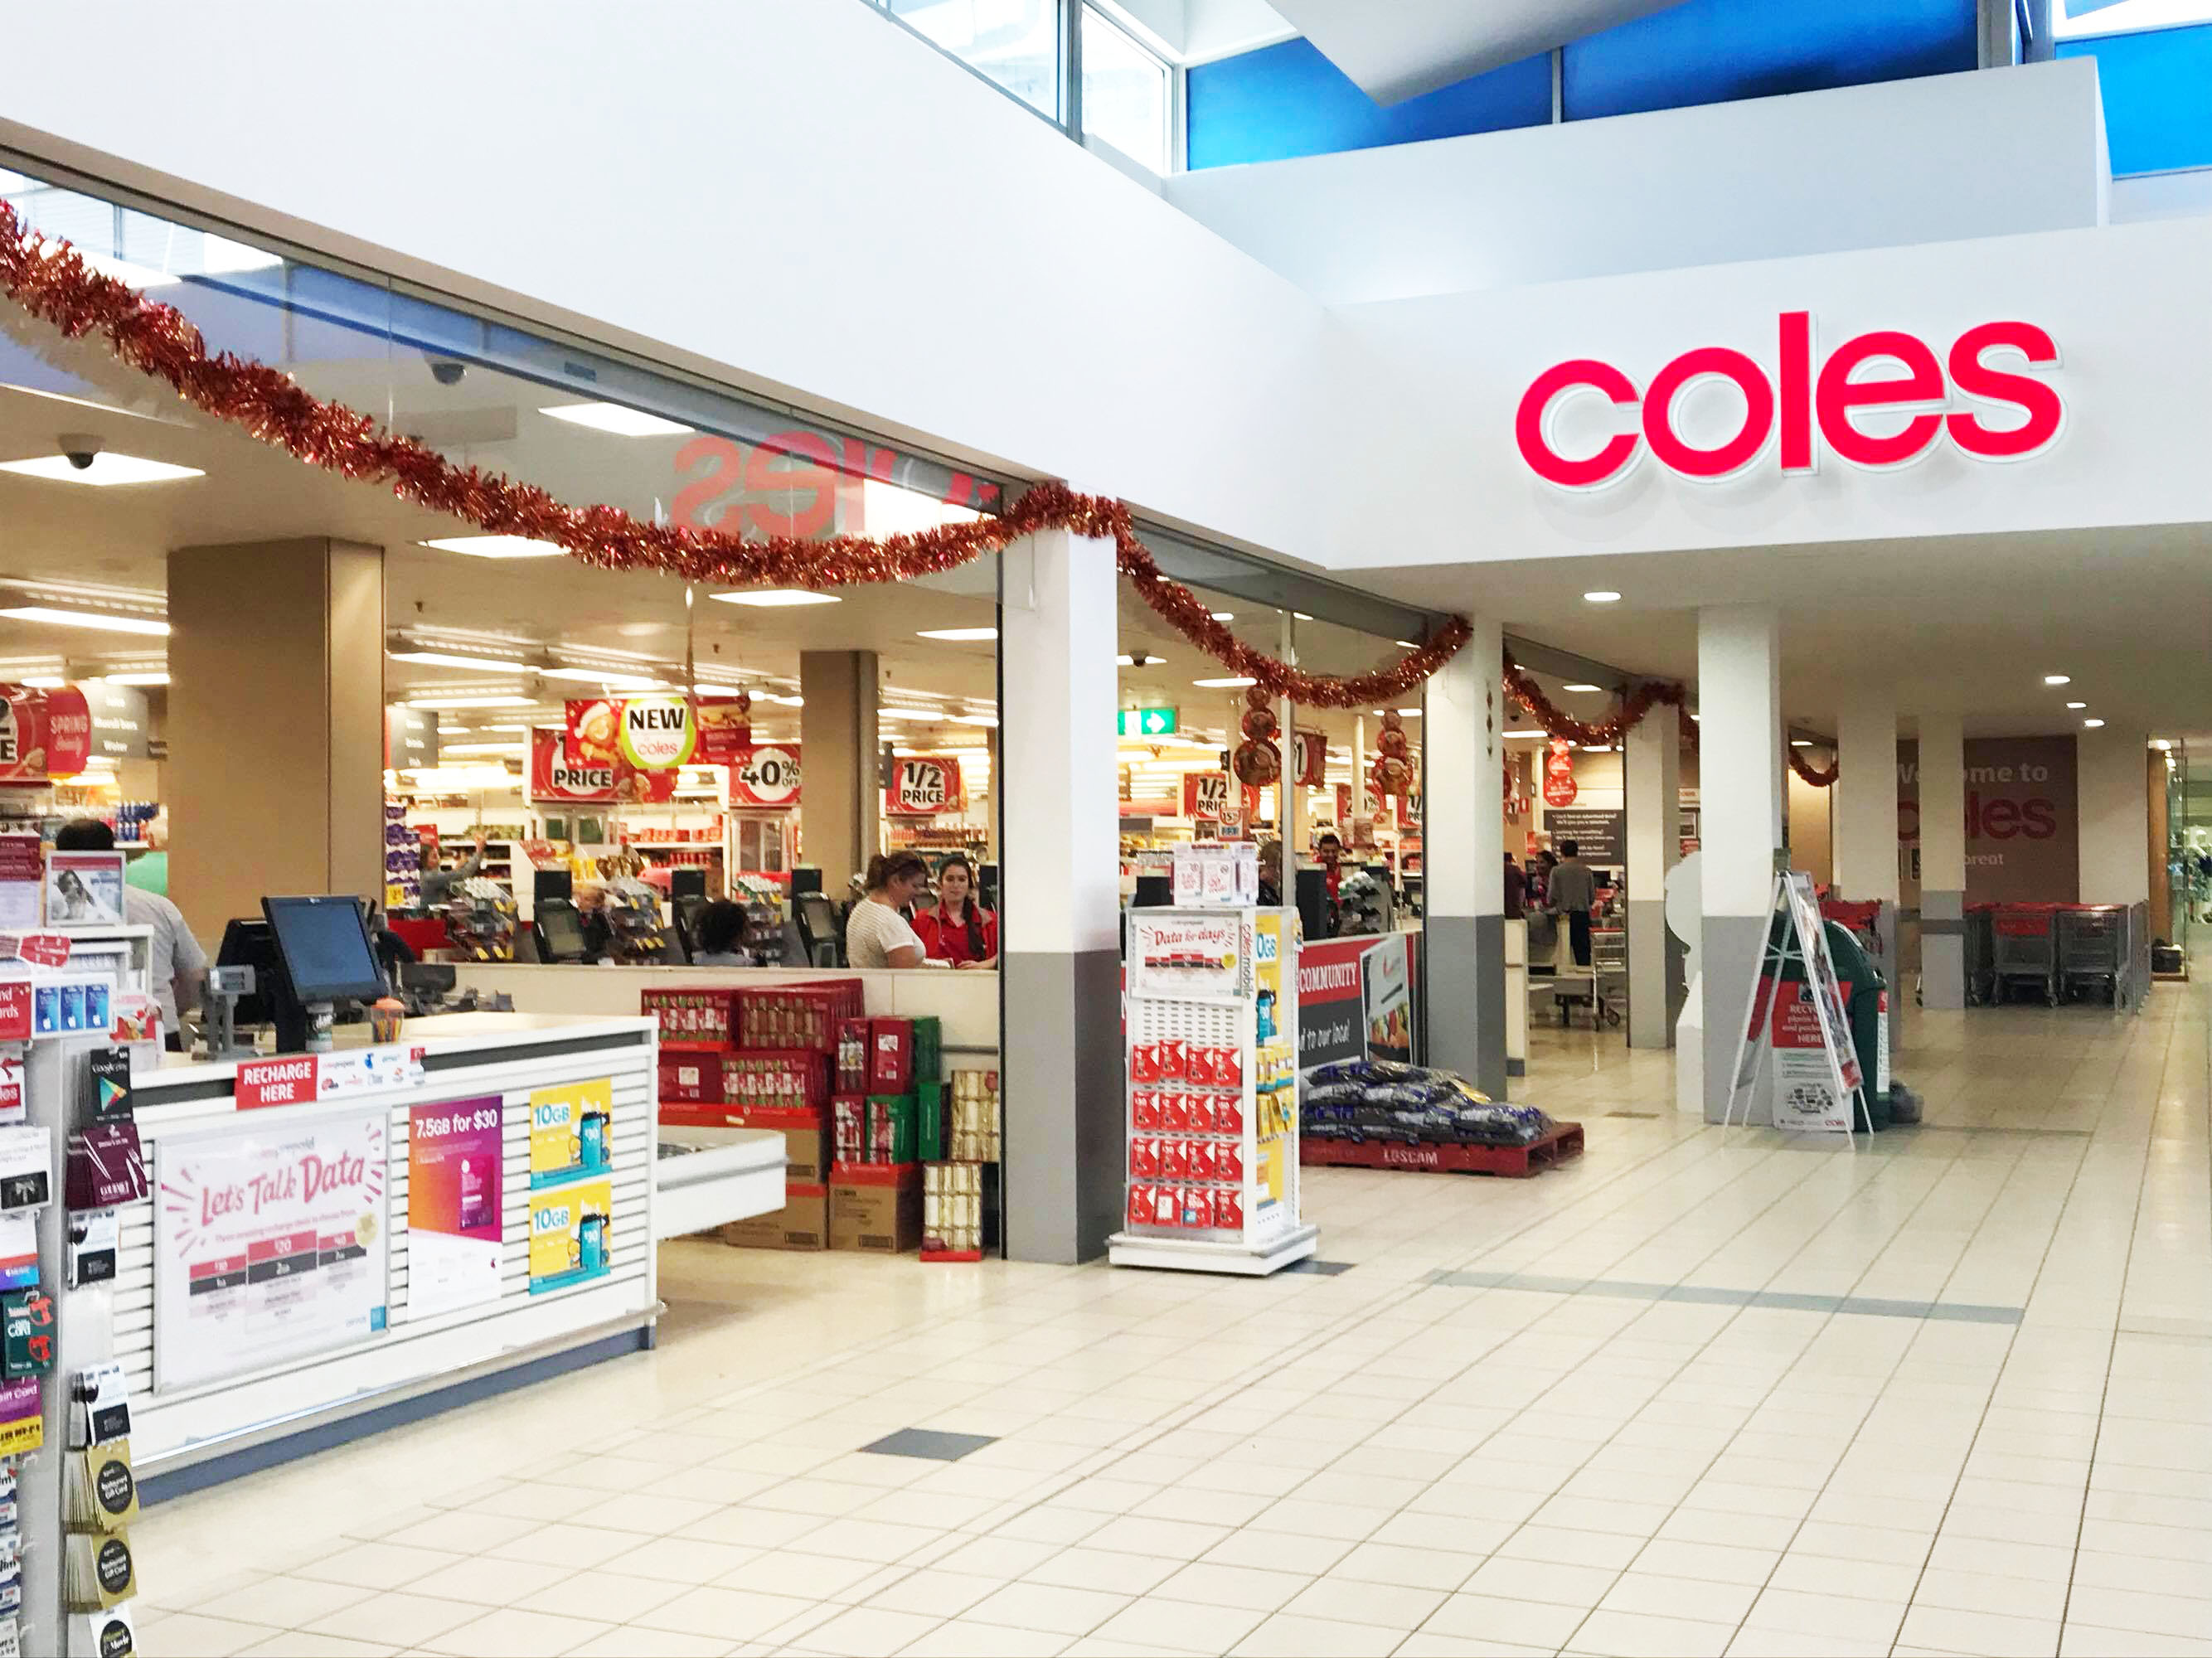 Coles have started a Quiet Hour initiative to create an autism friendly shopping experience. Find out if your store will be adopting this initiative!